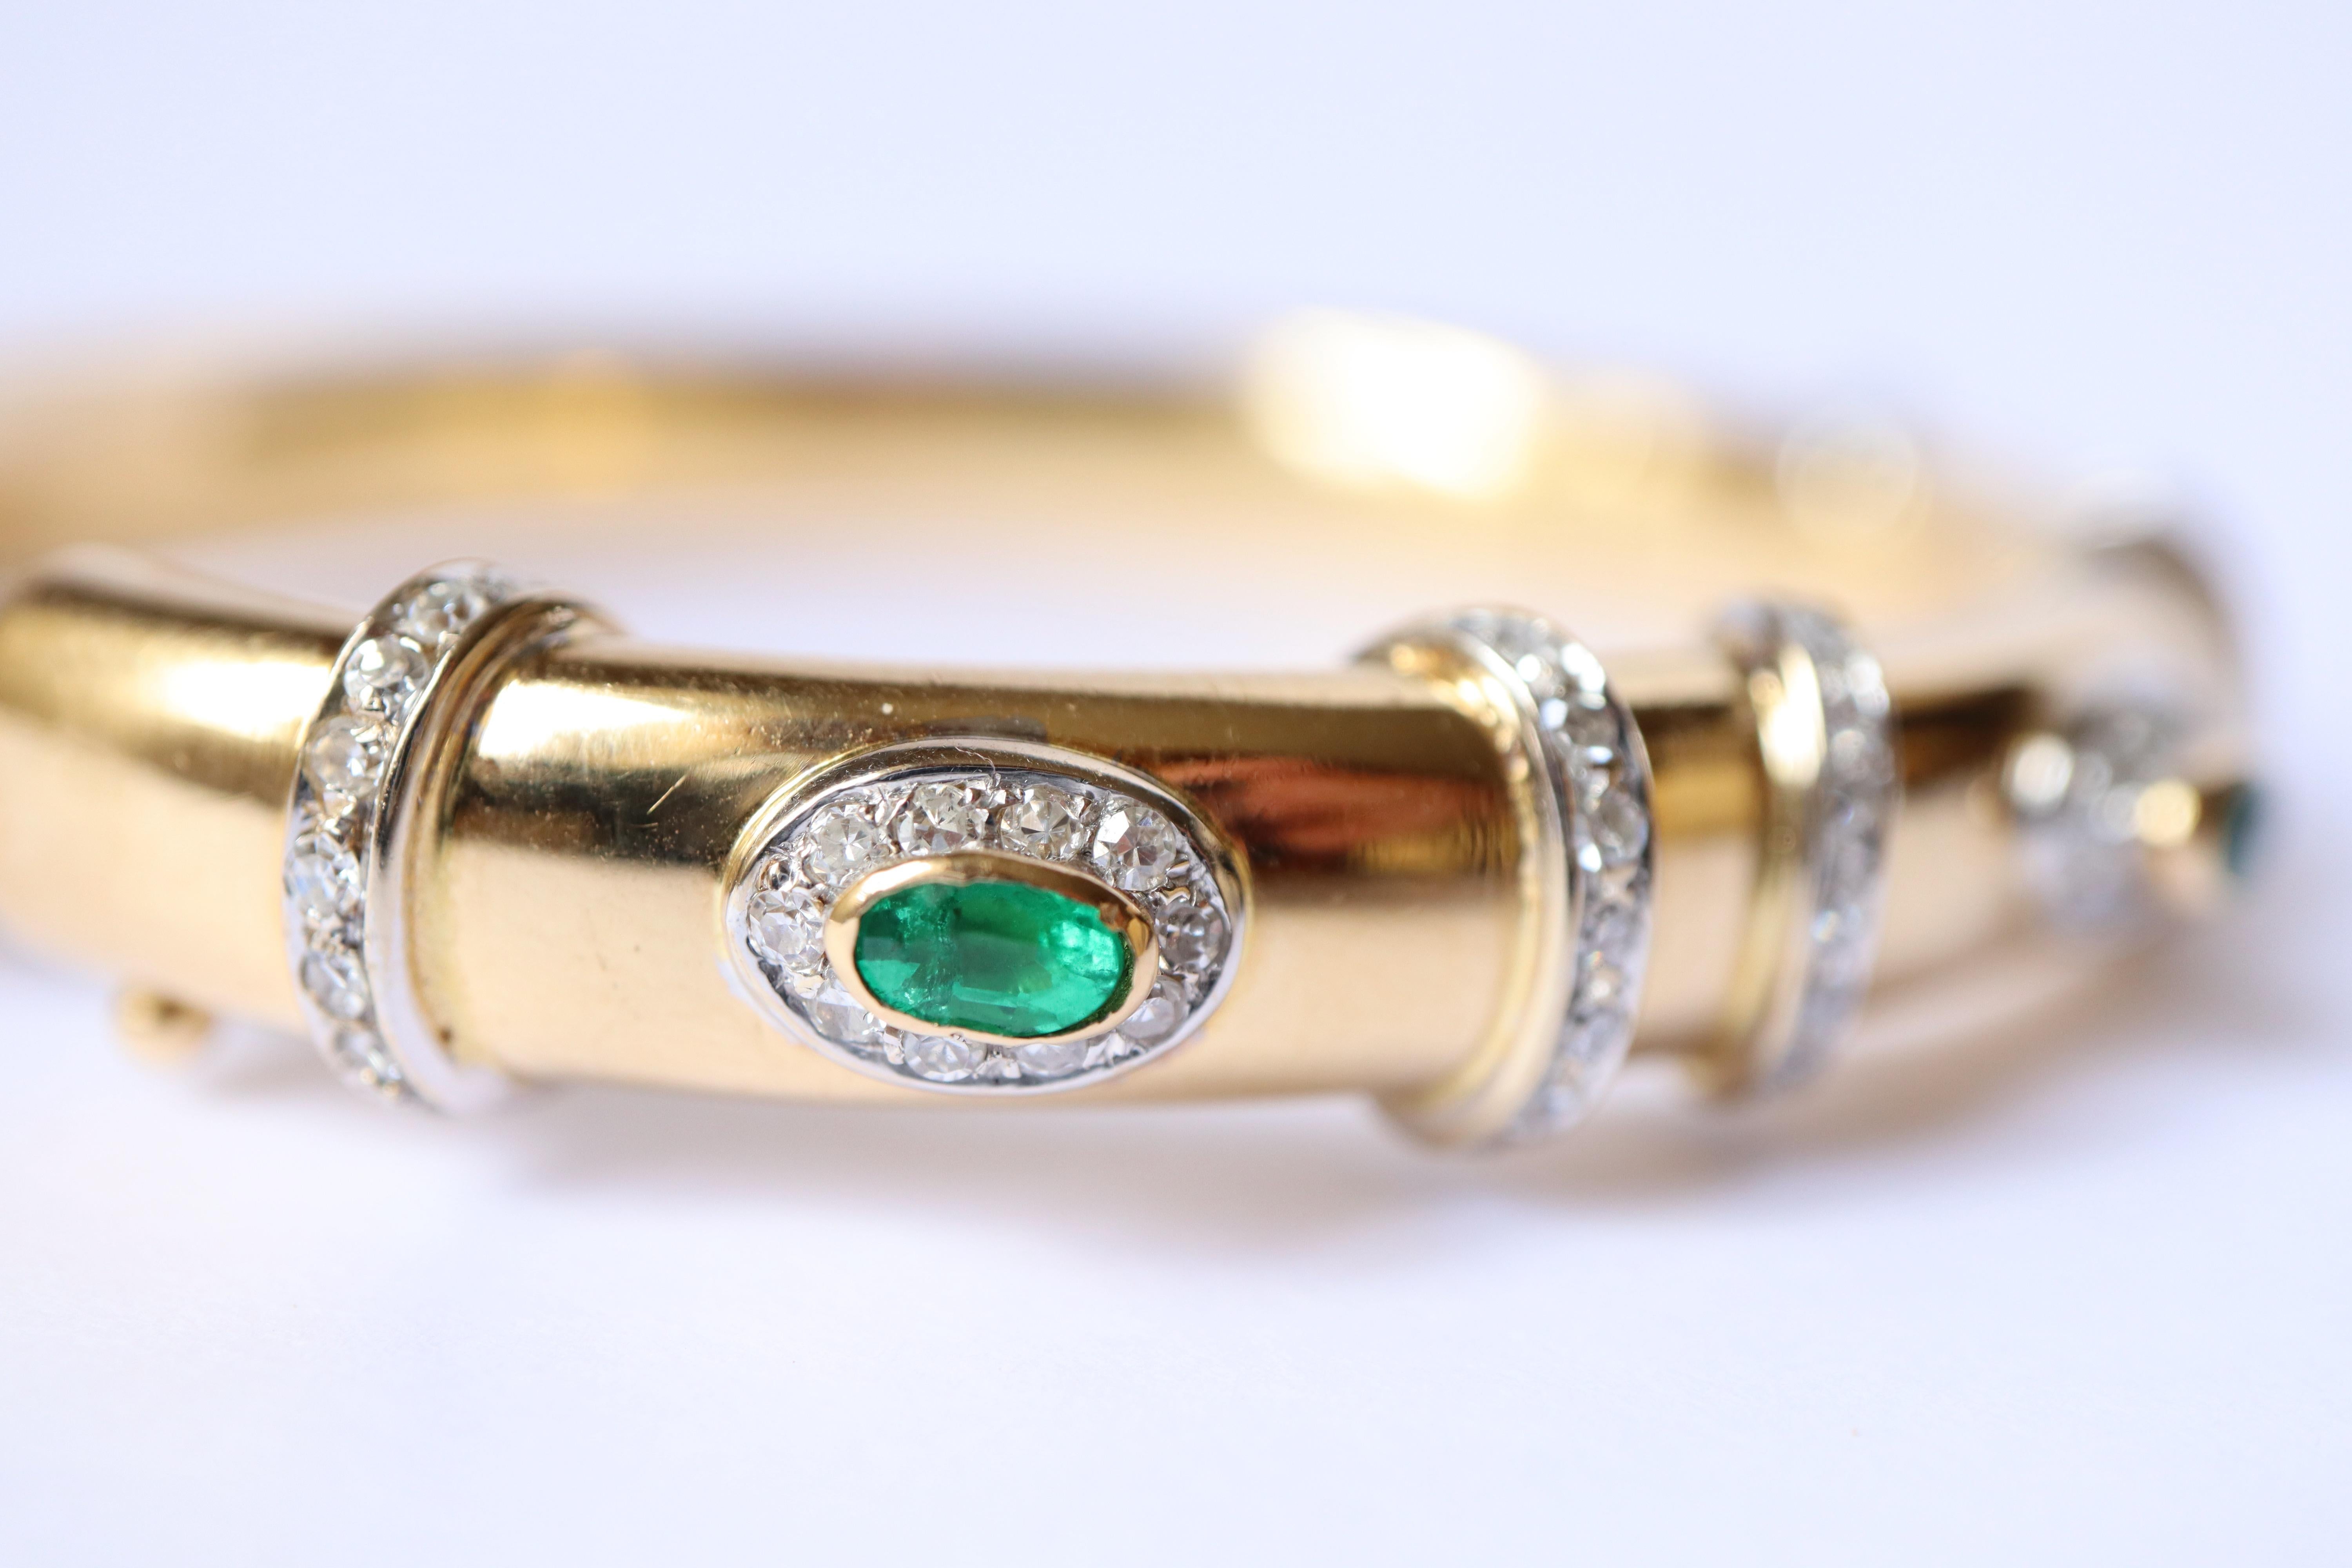 Cartier Rigid Emerald Bracelet 1960 in Yellow and White Gold 18 kt and Diamonds 9